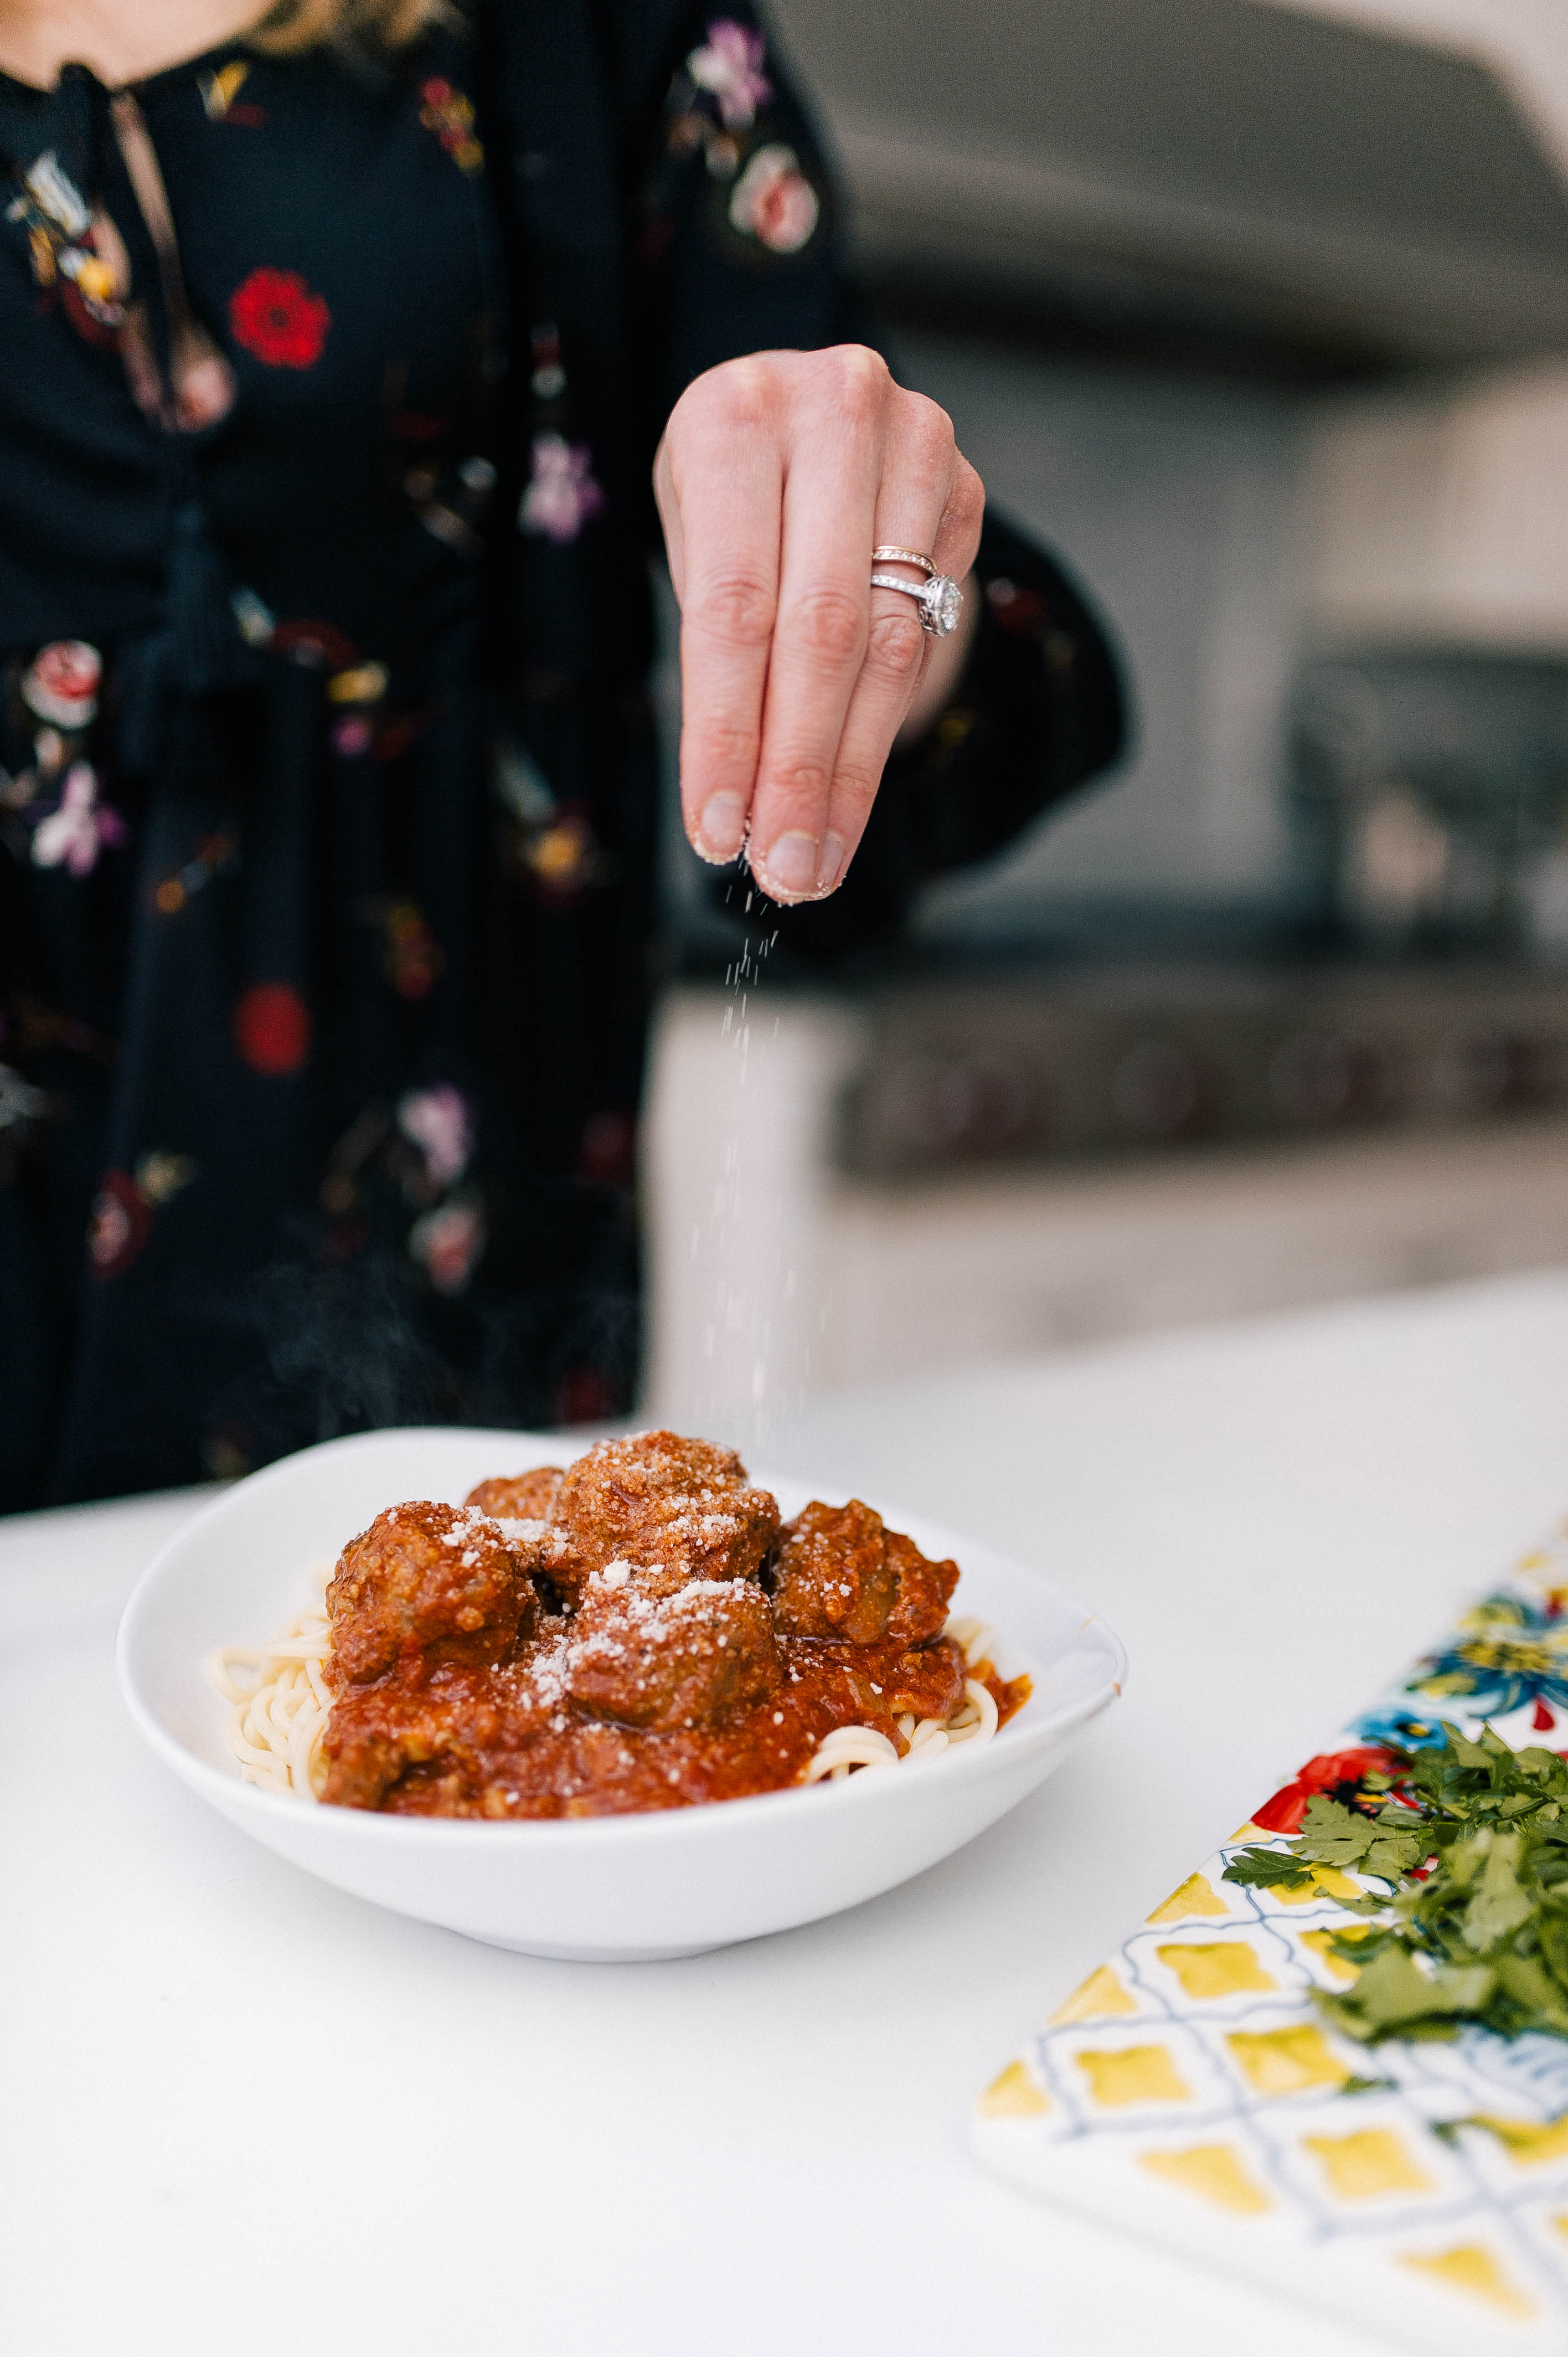 Eva Amurri sprinkles parmesan cheese on top of a bowl of spaghetti and slow cooker meatballs